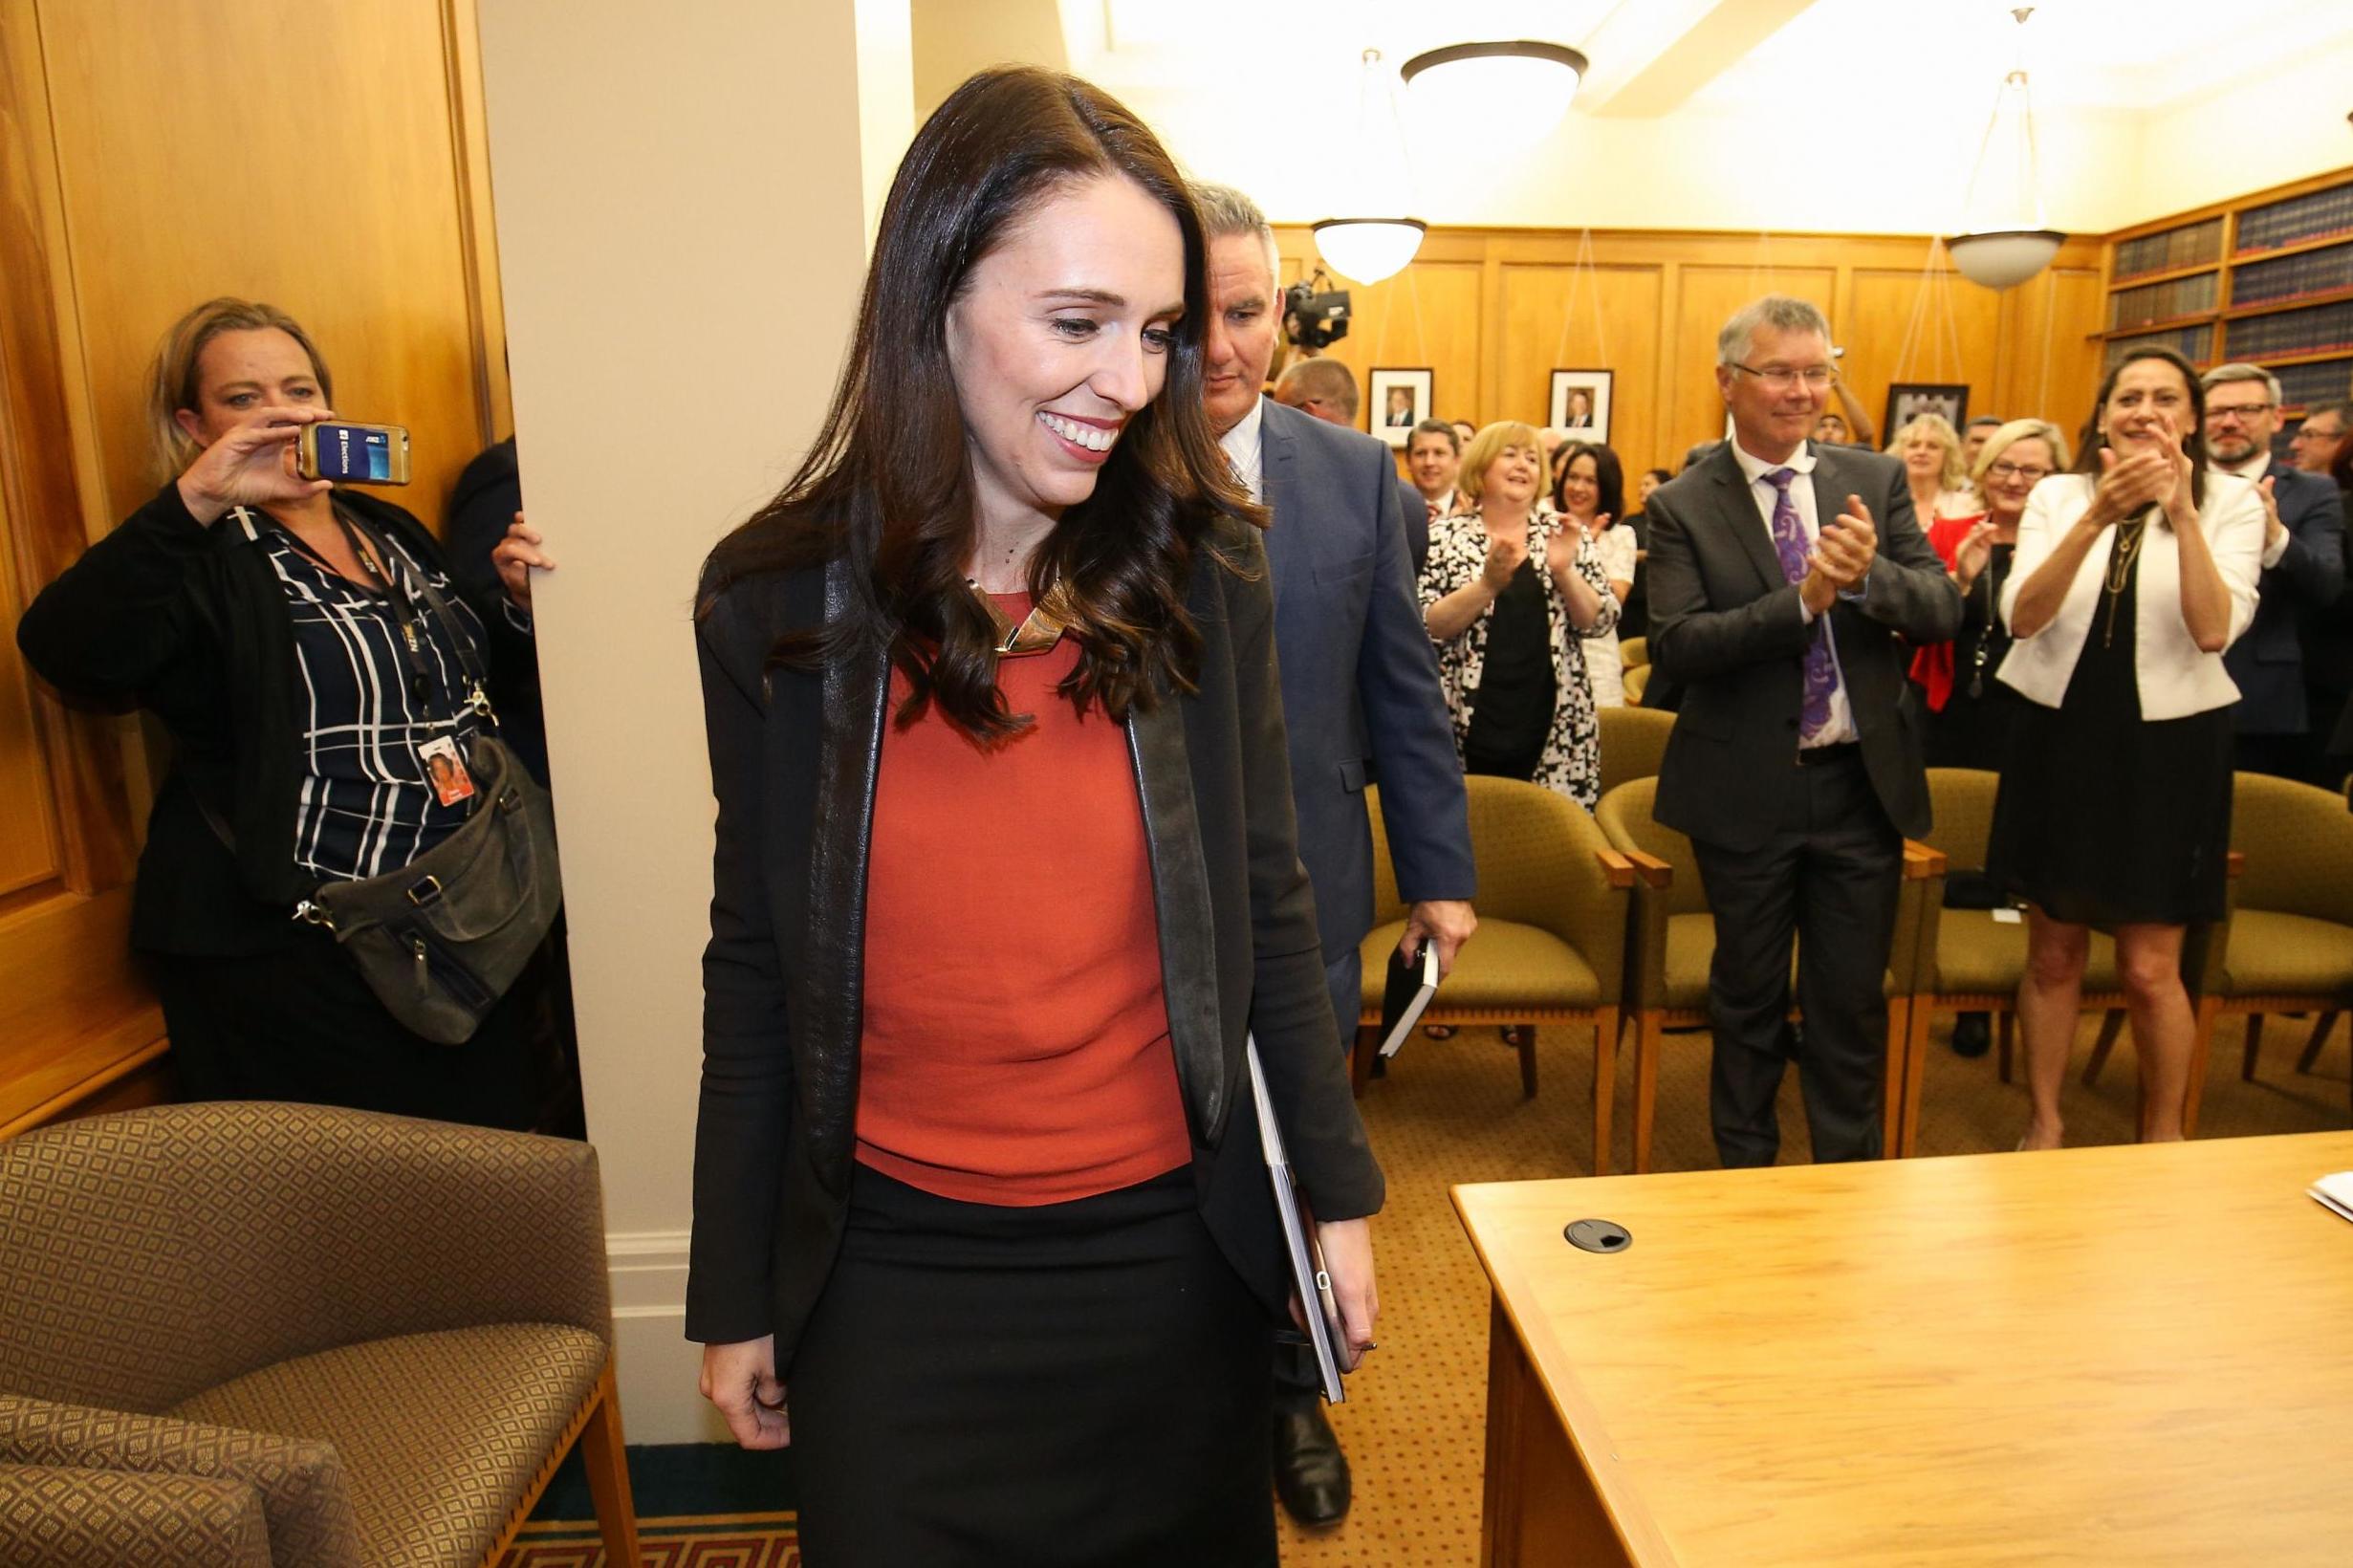 Lacinda Ardern receives a standing ovation as she arrives at Parliament after agreeing a deal to form a coalition government